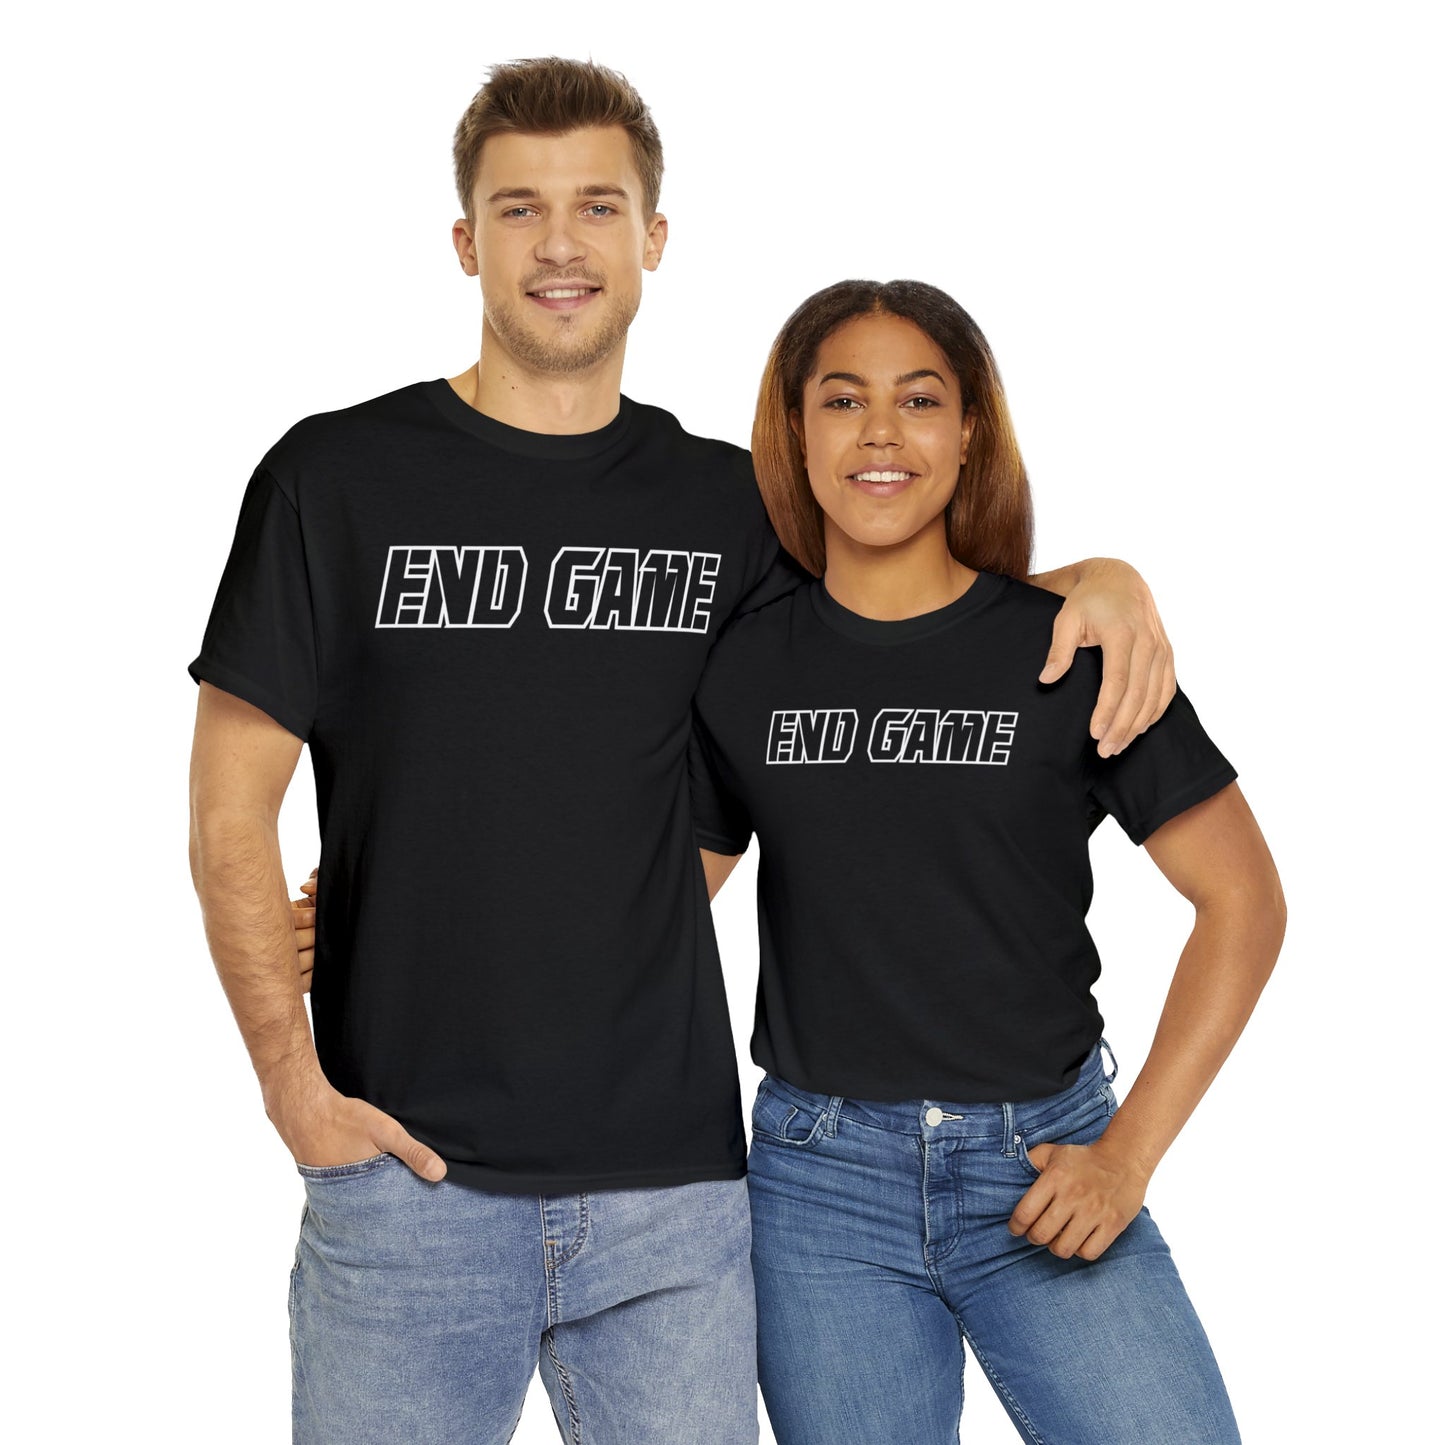 End Game T-Shirt